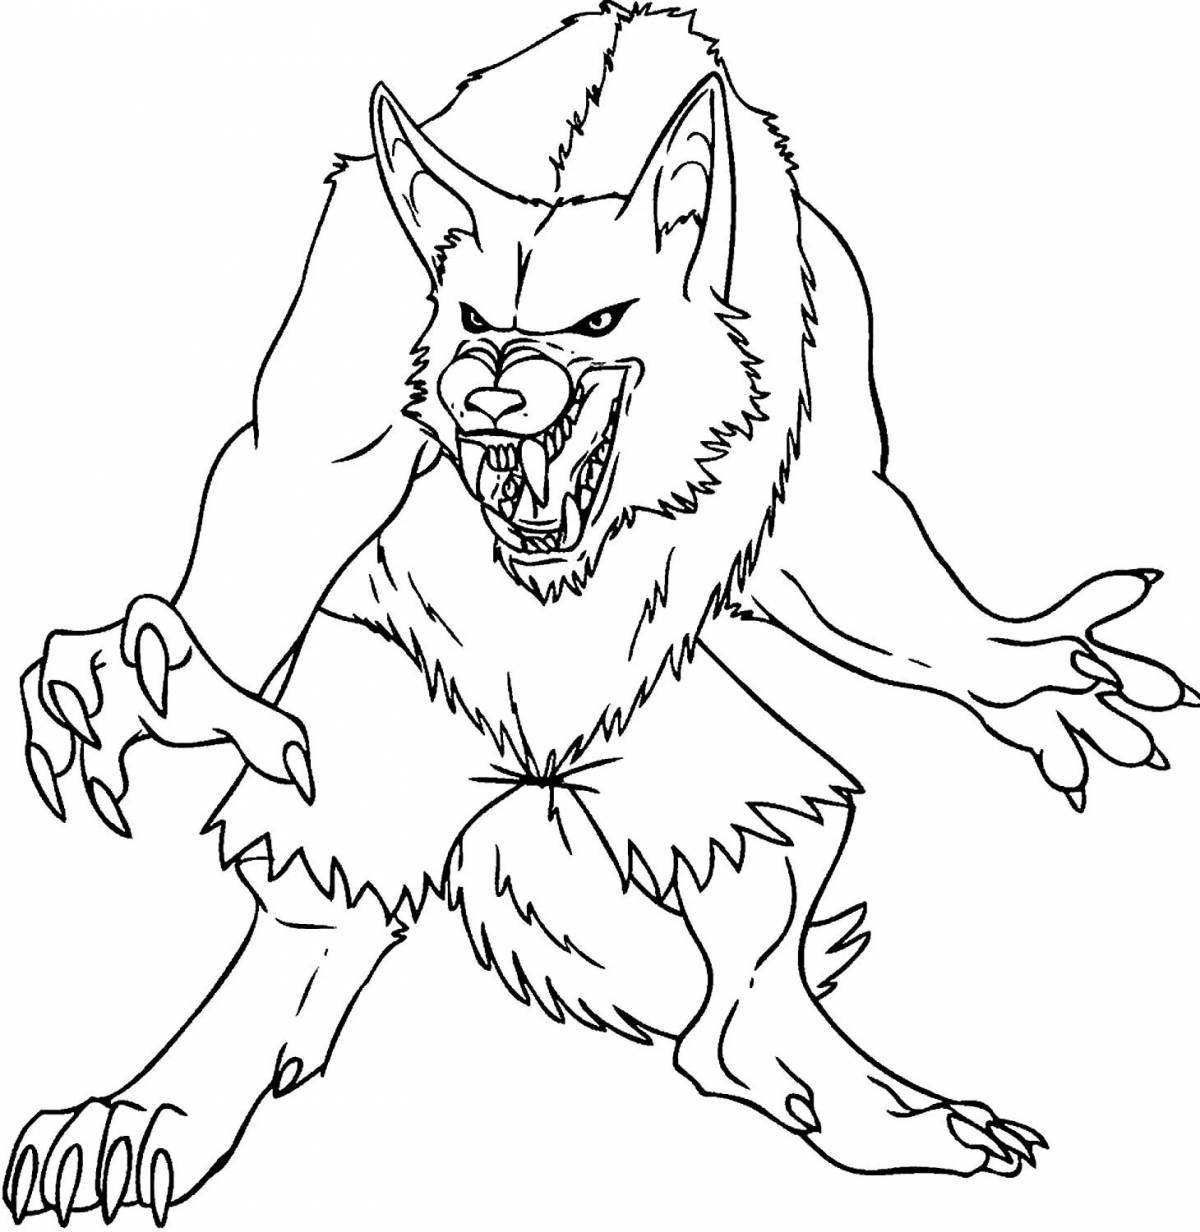 Brave wolf coloring page